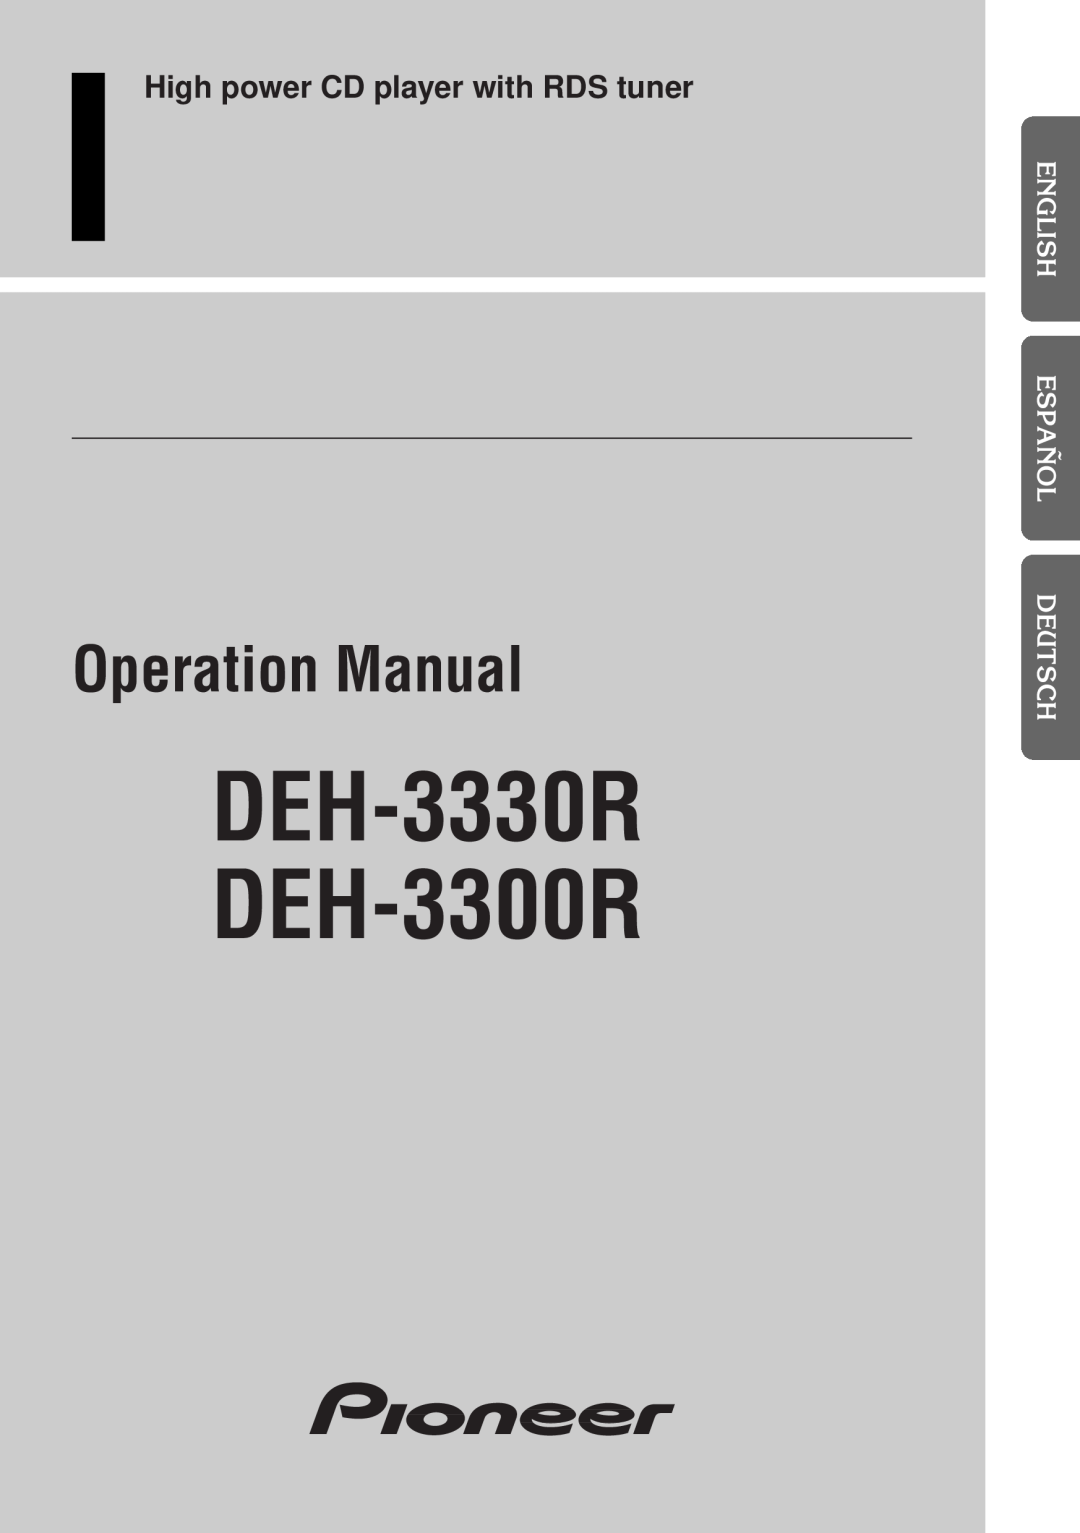 Pioneer operation manual High power CD player with RDS tuner, DEH-3330R DEH-3300R, Operation Manual 